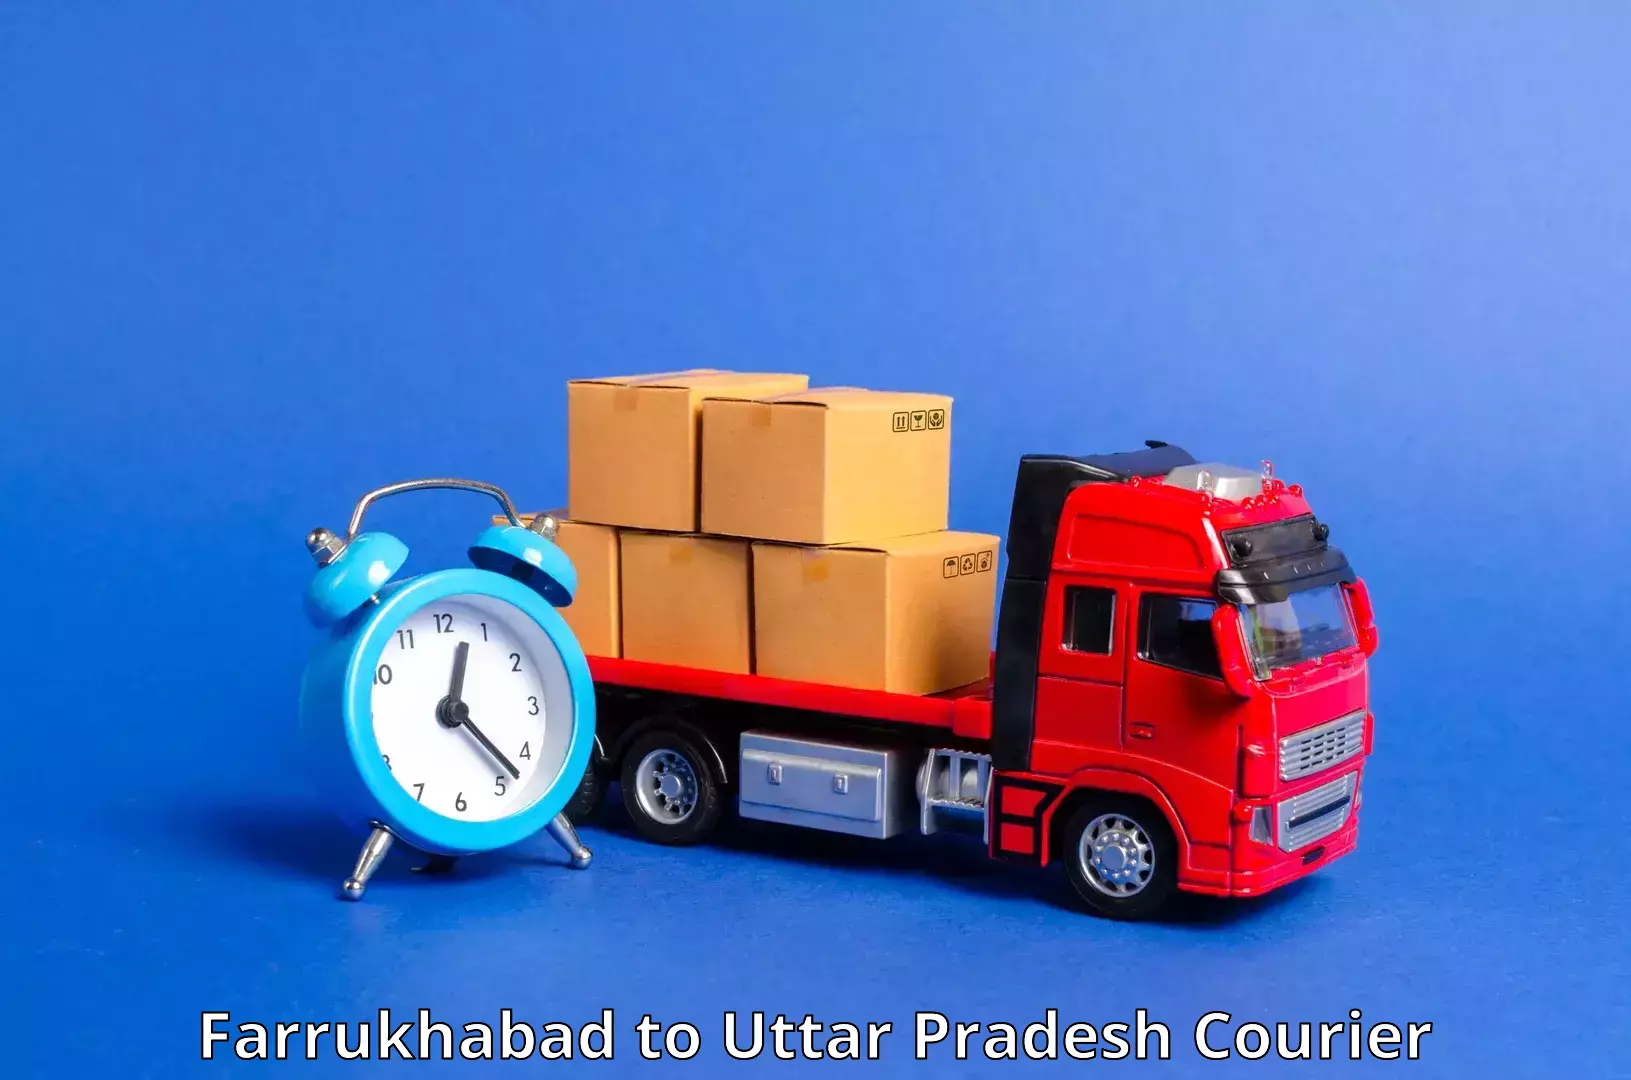 Same-day delivery solutions Farrukhabad to Ambedkar Nagar